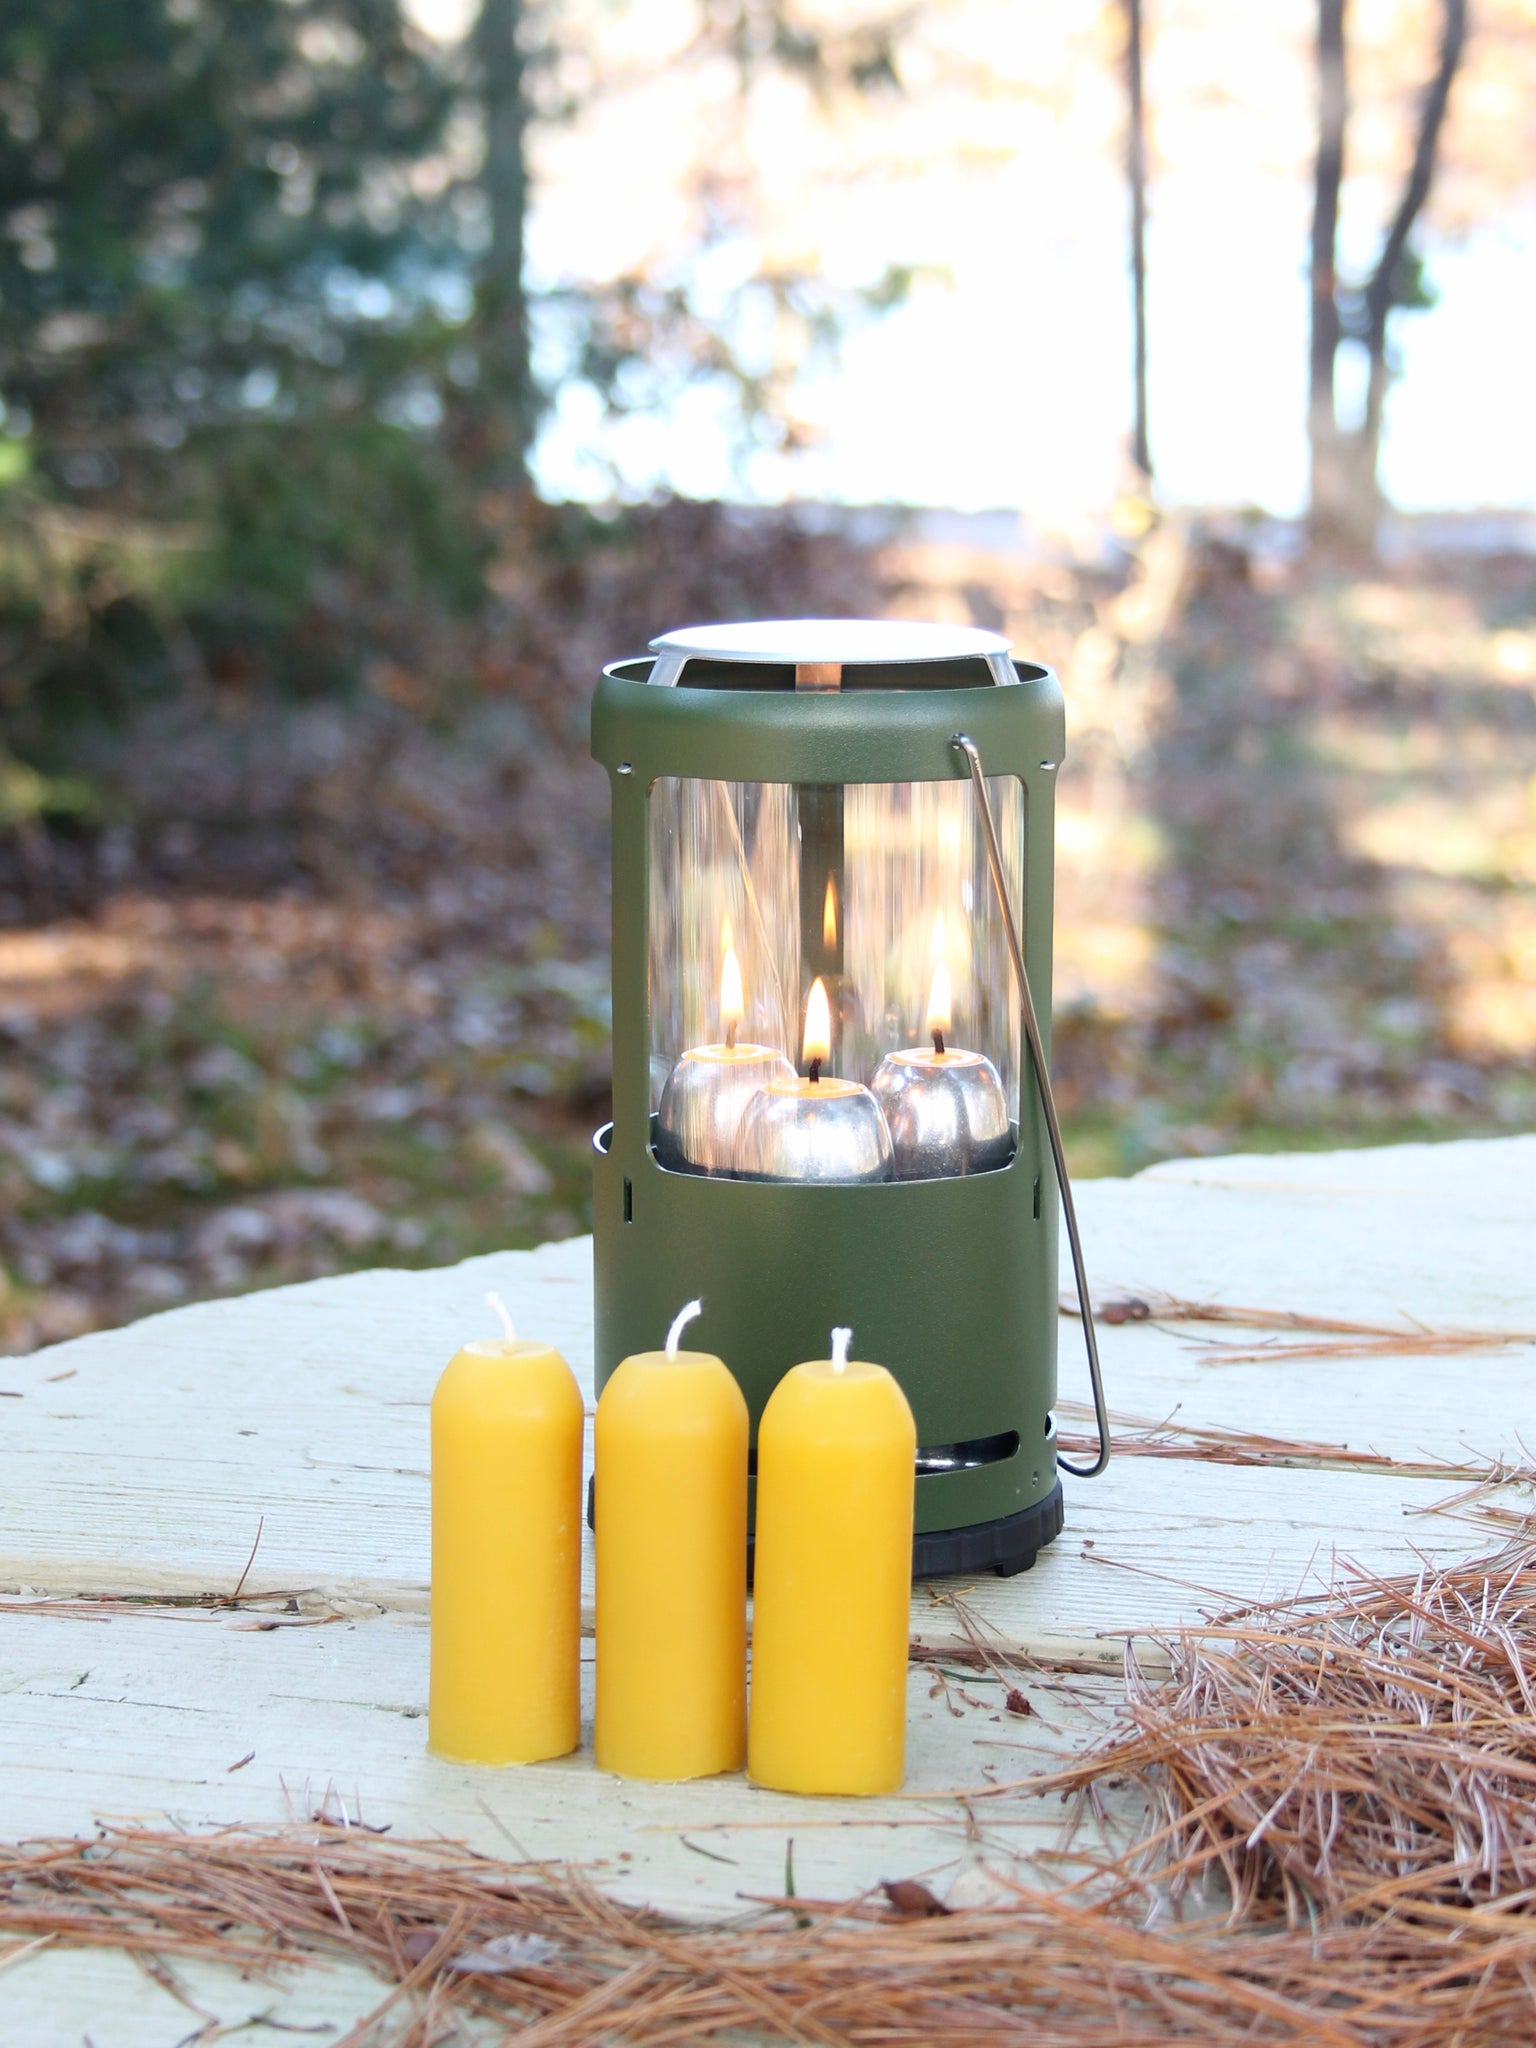 15-Hour Natural Beeswax Candles Compatible with UCO Candle Lanterns -  Smokeless Clean Long Lasting Burning for Outdoor, Camping, Emergency,  Survival